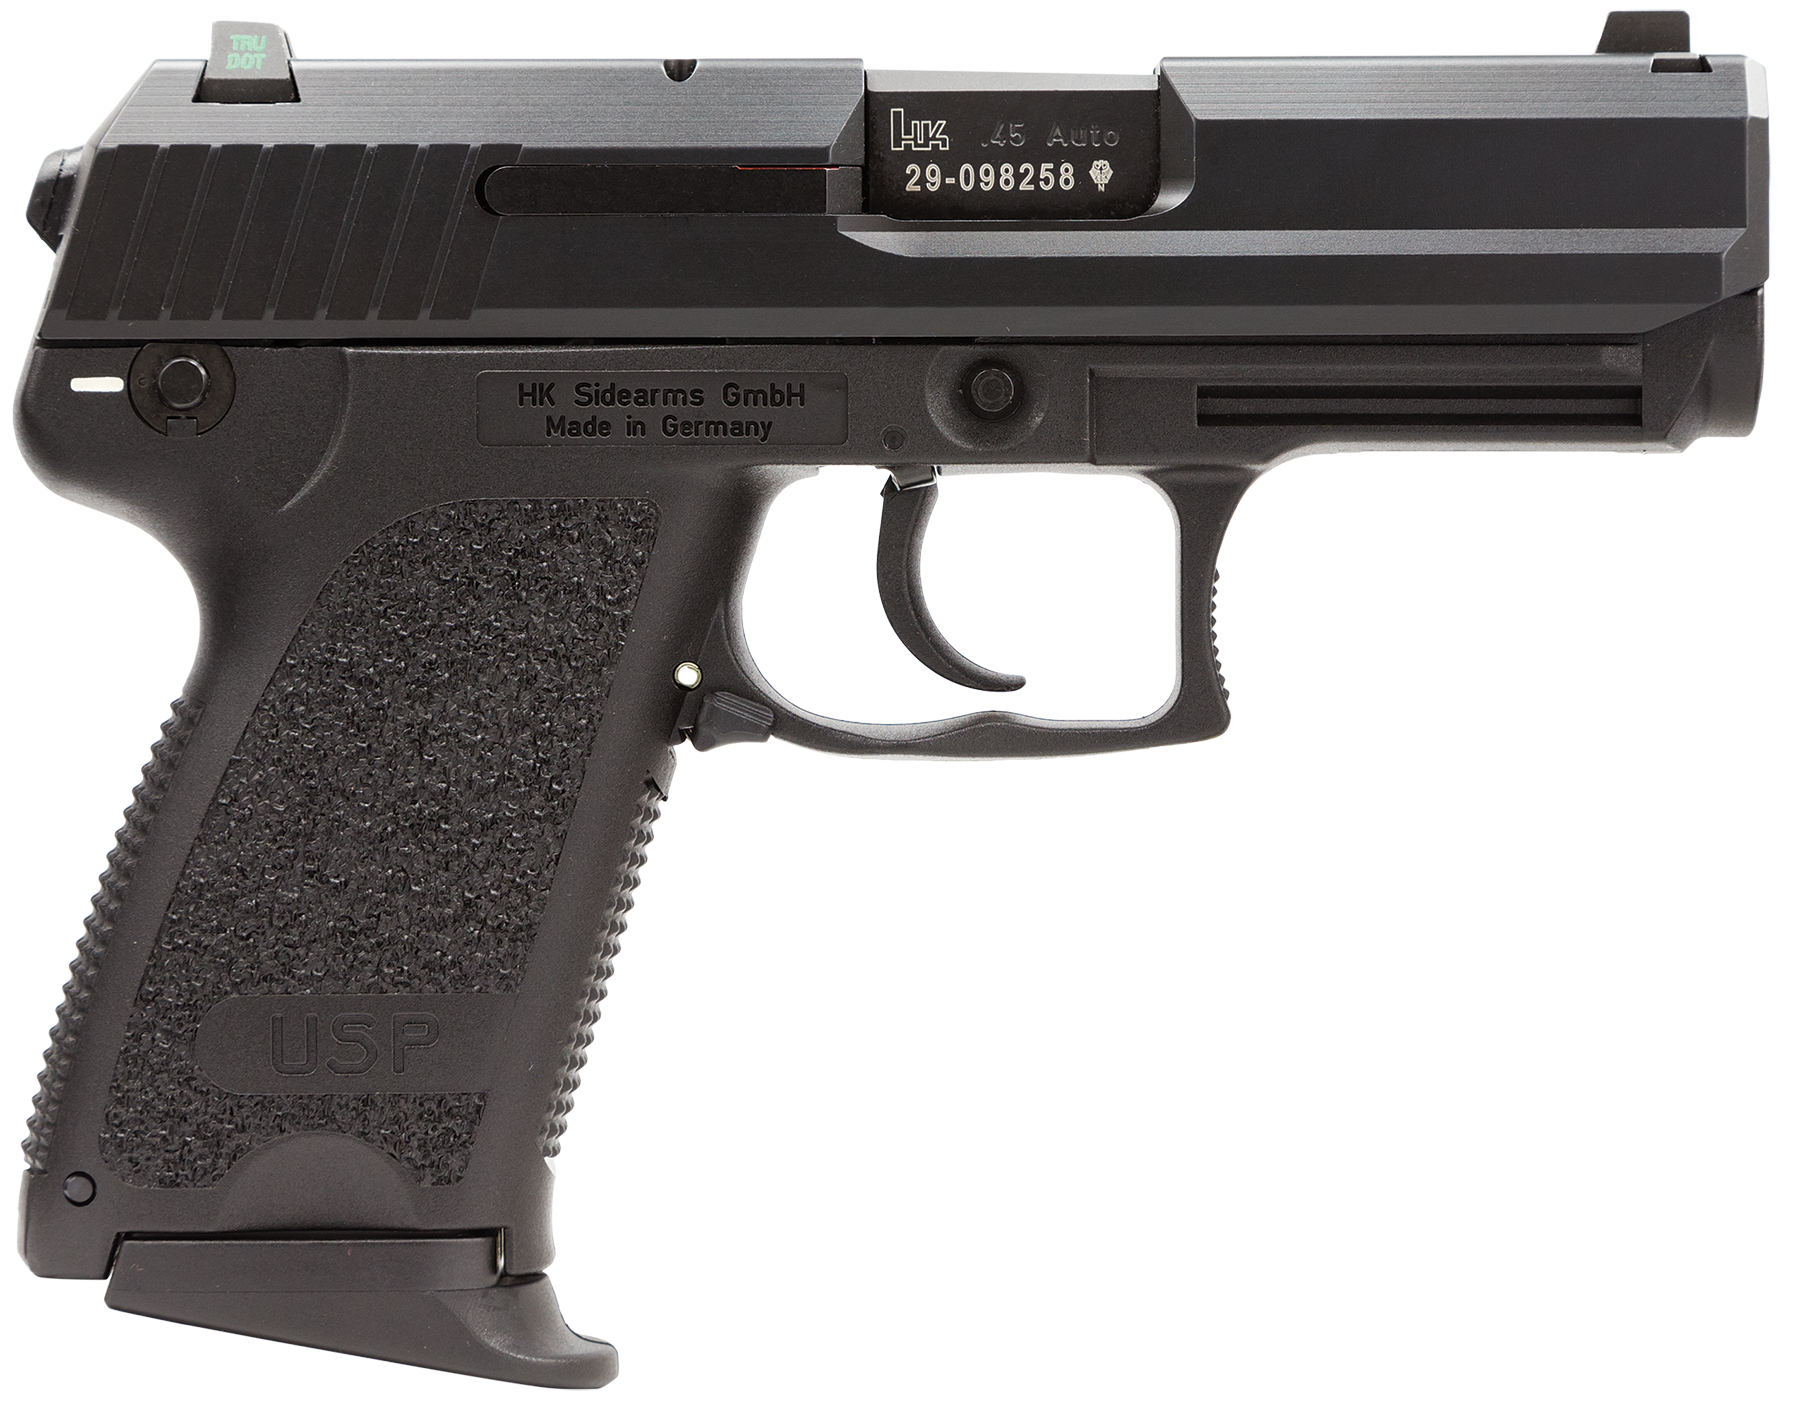 Image of HK USP45 Compact (V1) DA/SA, safety/decocking lever on left, three 8rd magazines and night sights